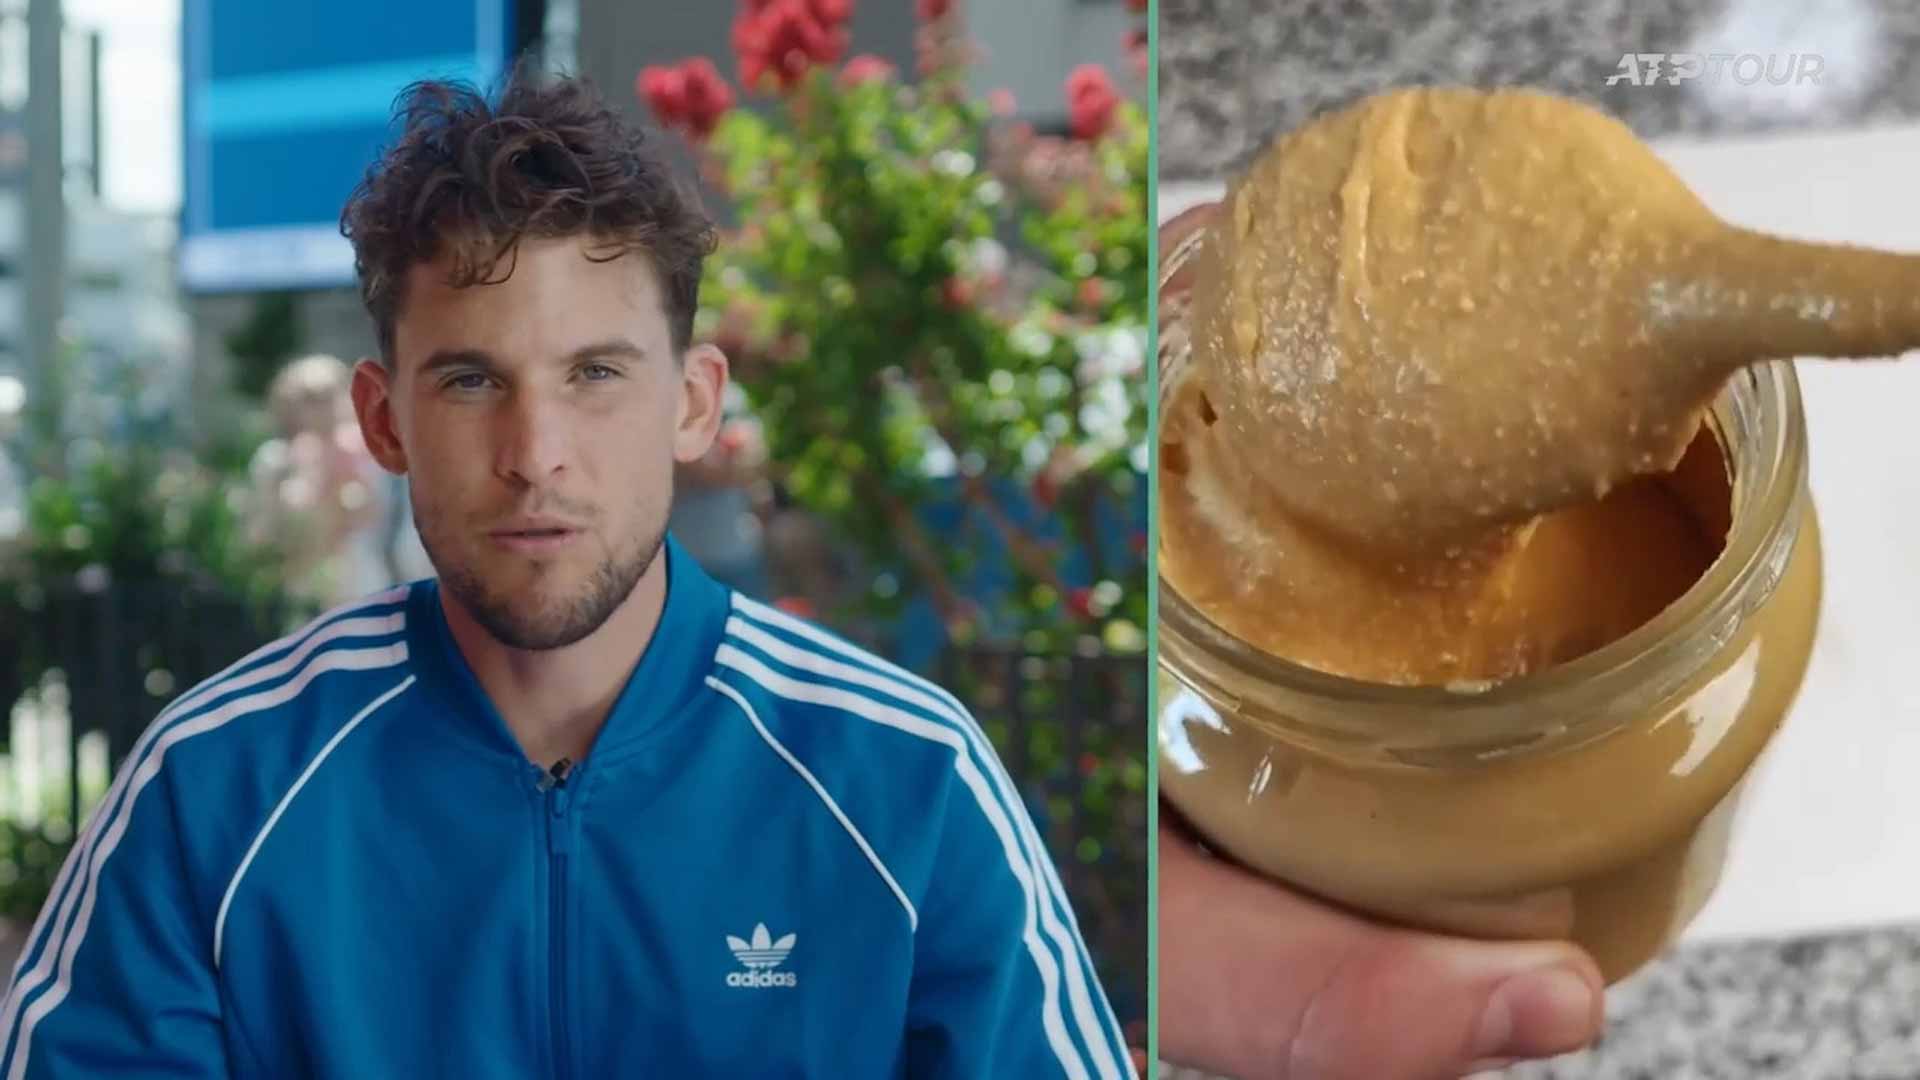 One of Dominic Thiem's favourite foods is peanut butter.